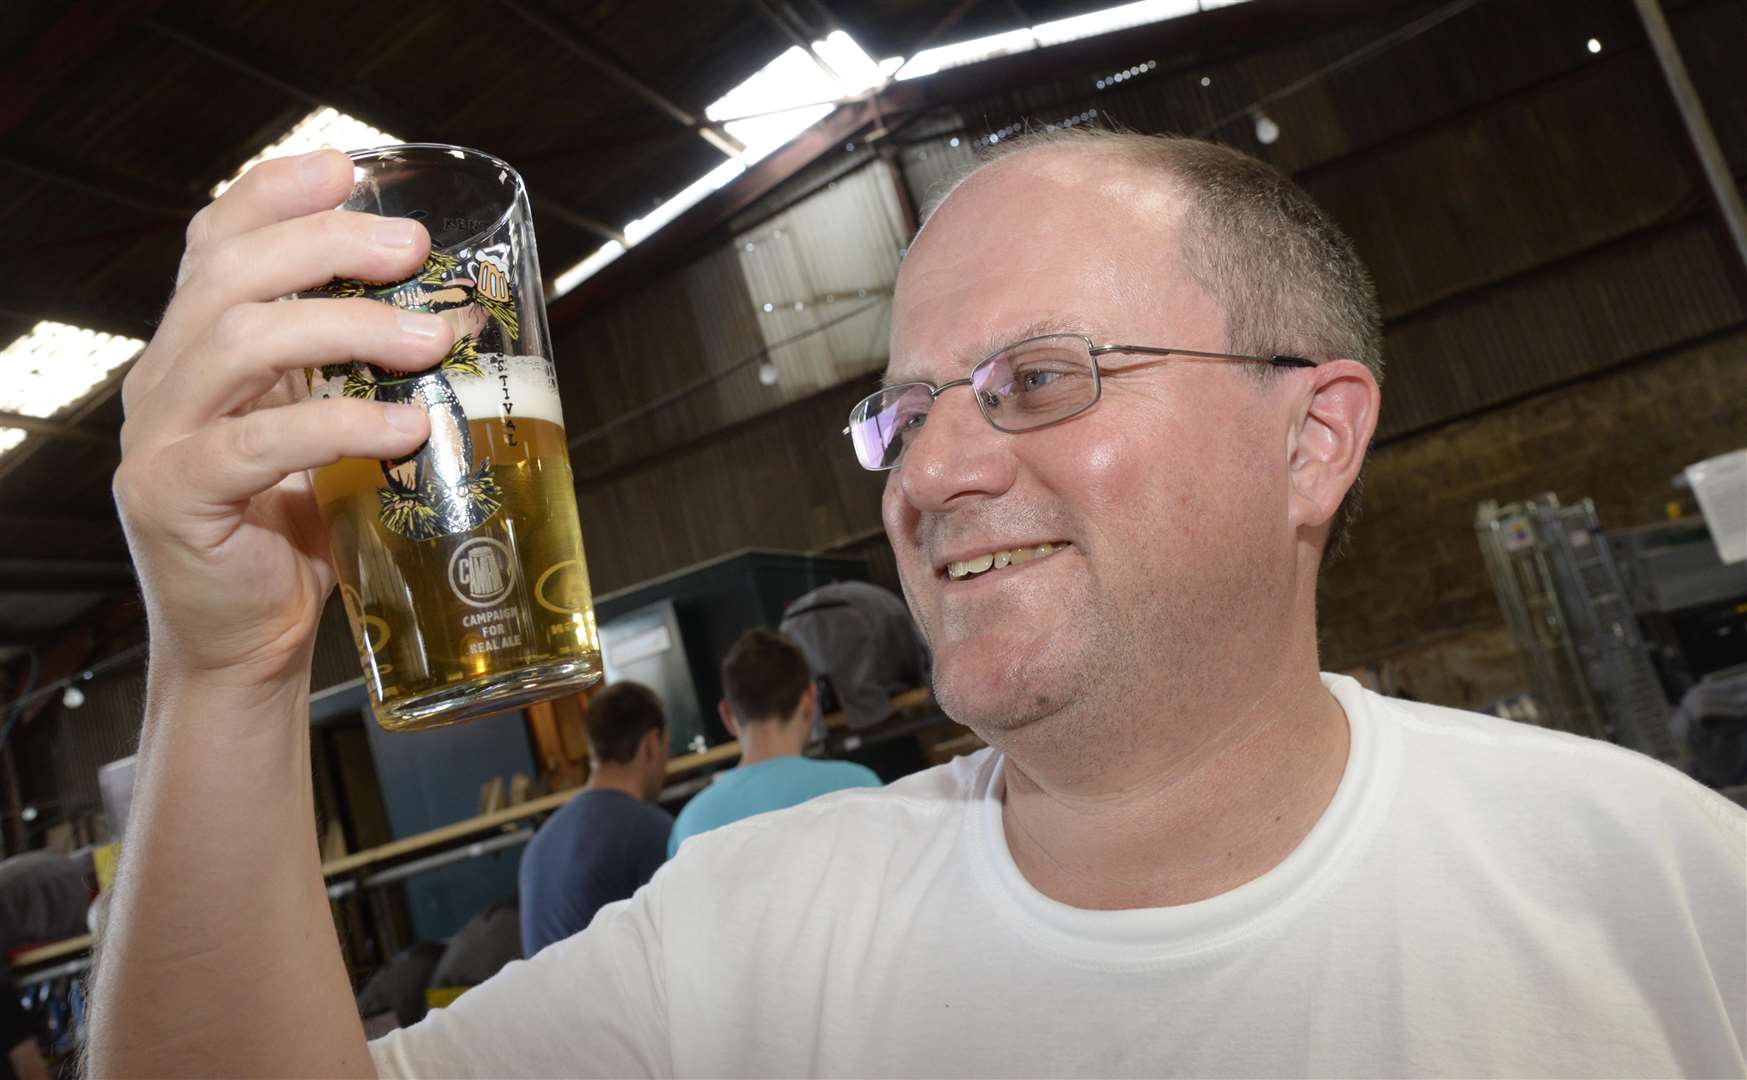 Geoffrey Samme samples a glass of Oakham light bitter at a previous festival Picture: Chris Davey